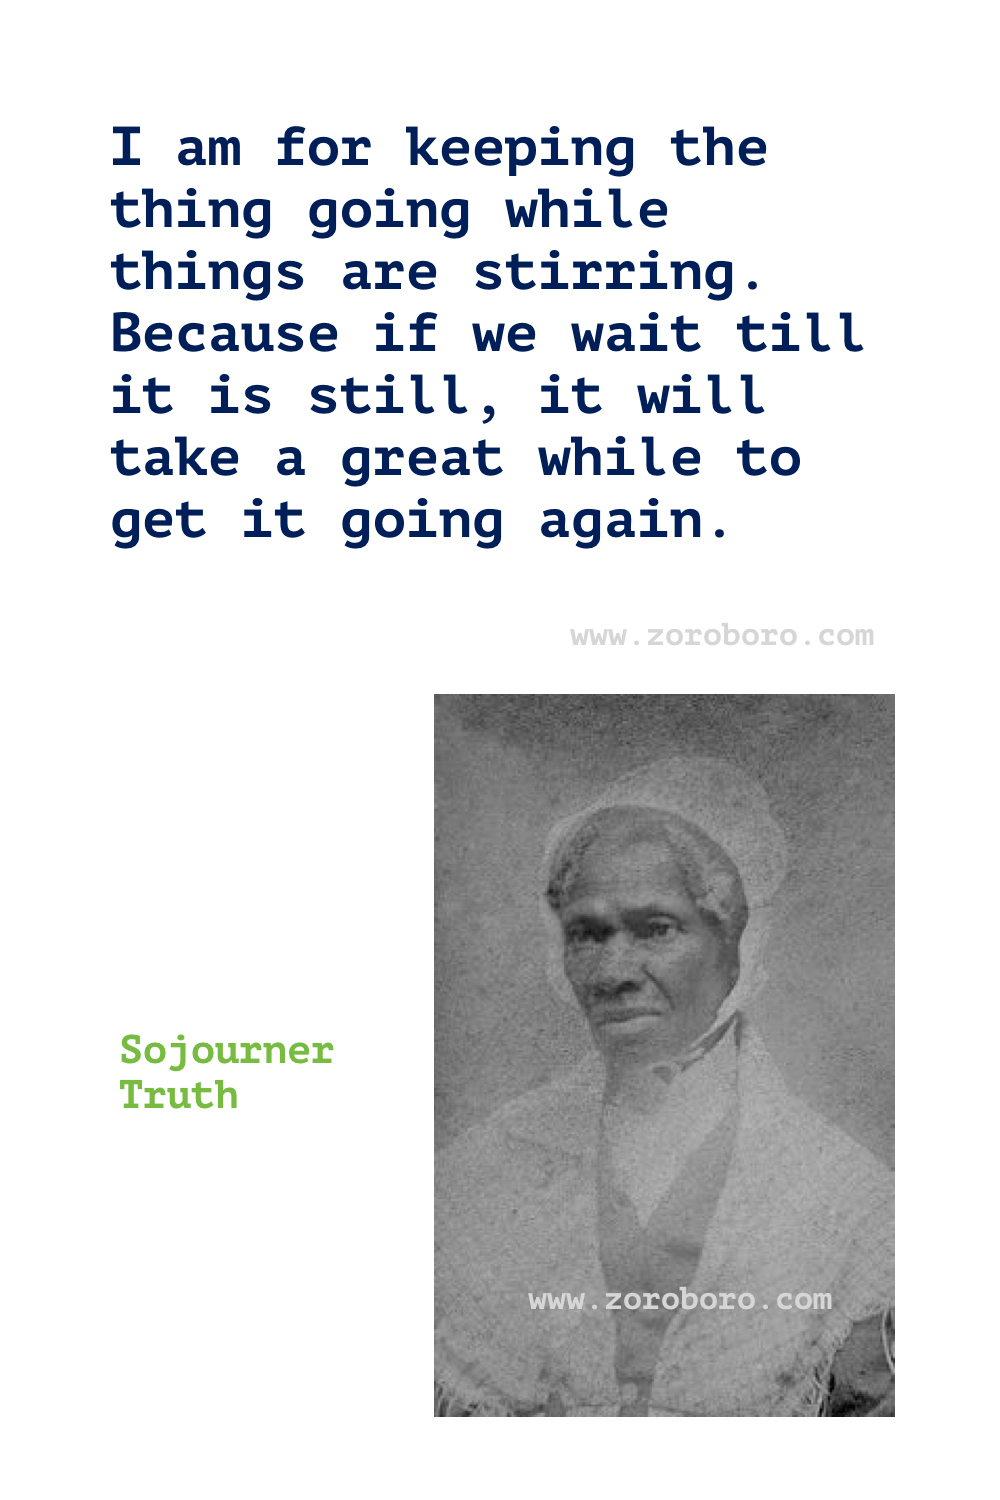 Sojourner Truth Quotes. Black History Quotes, Giving Quotes, Justice Quotes, Slavery Quotes. Sojourner Truth Books Quotes. Sojourner Truth